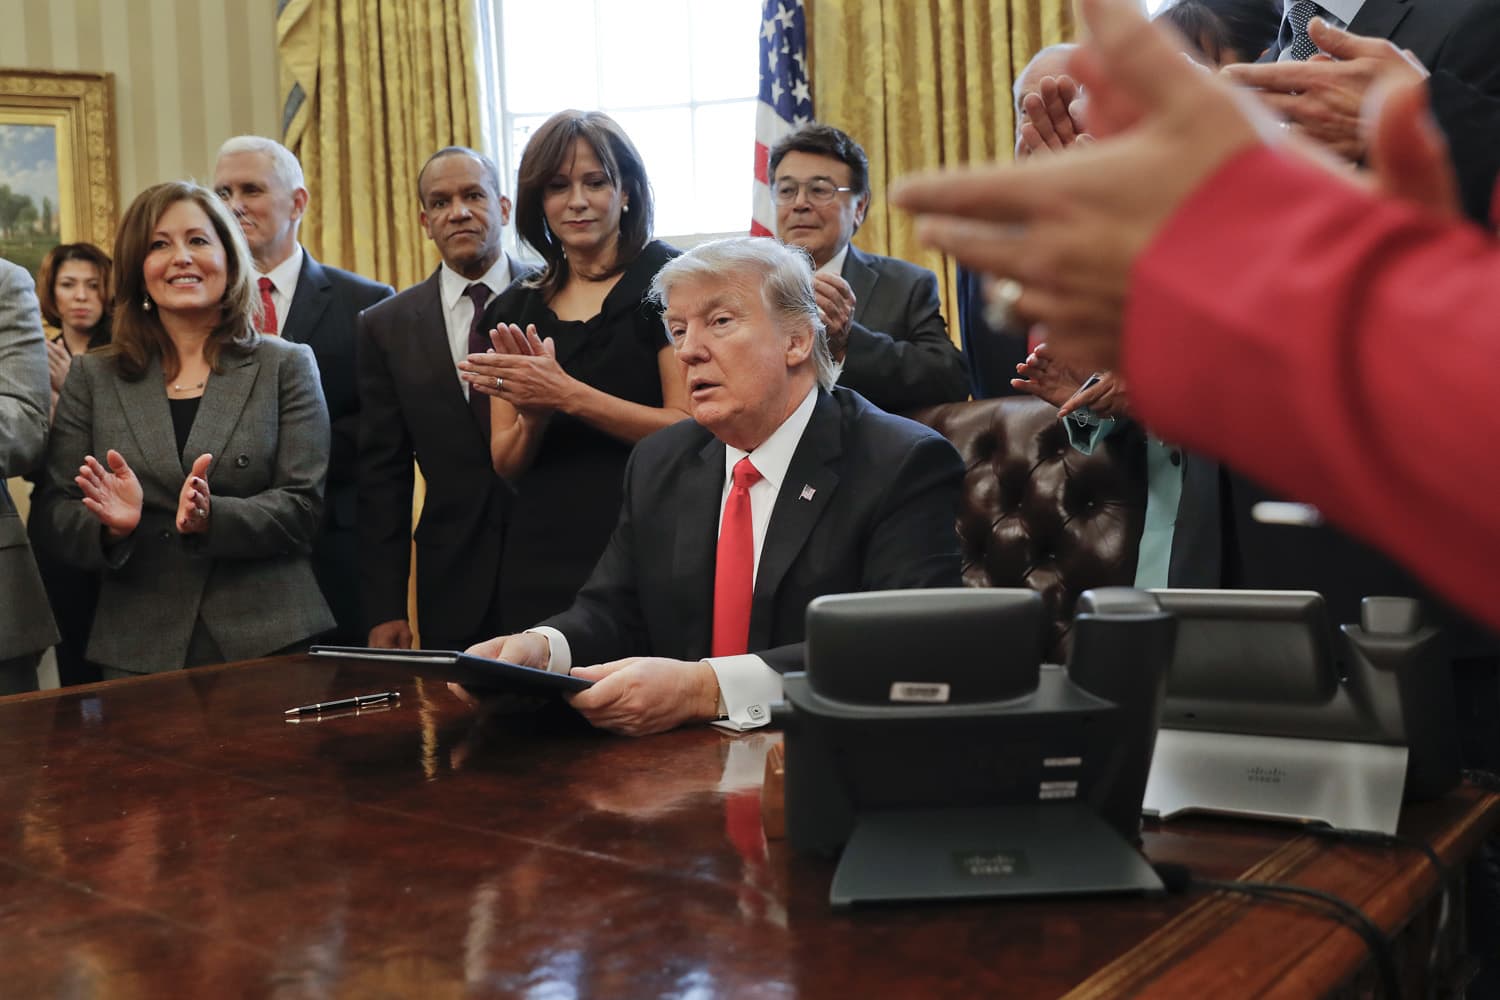 Small business leaders applaud President Donald Trump after he signed an executive order in the Oval Office of the White House in Washington, DC. (Pablo Martinez Monsivais/AP)